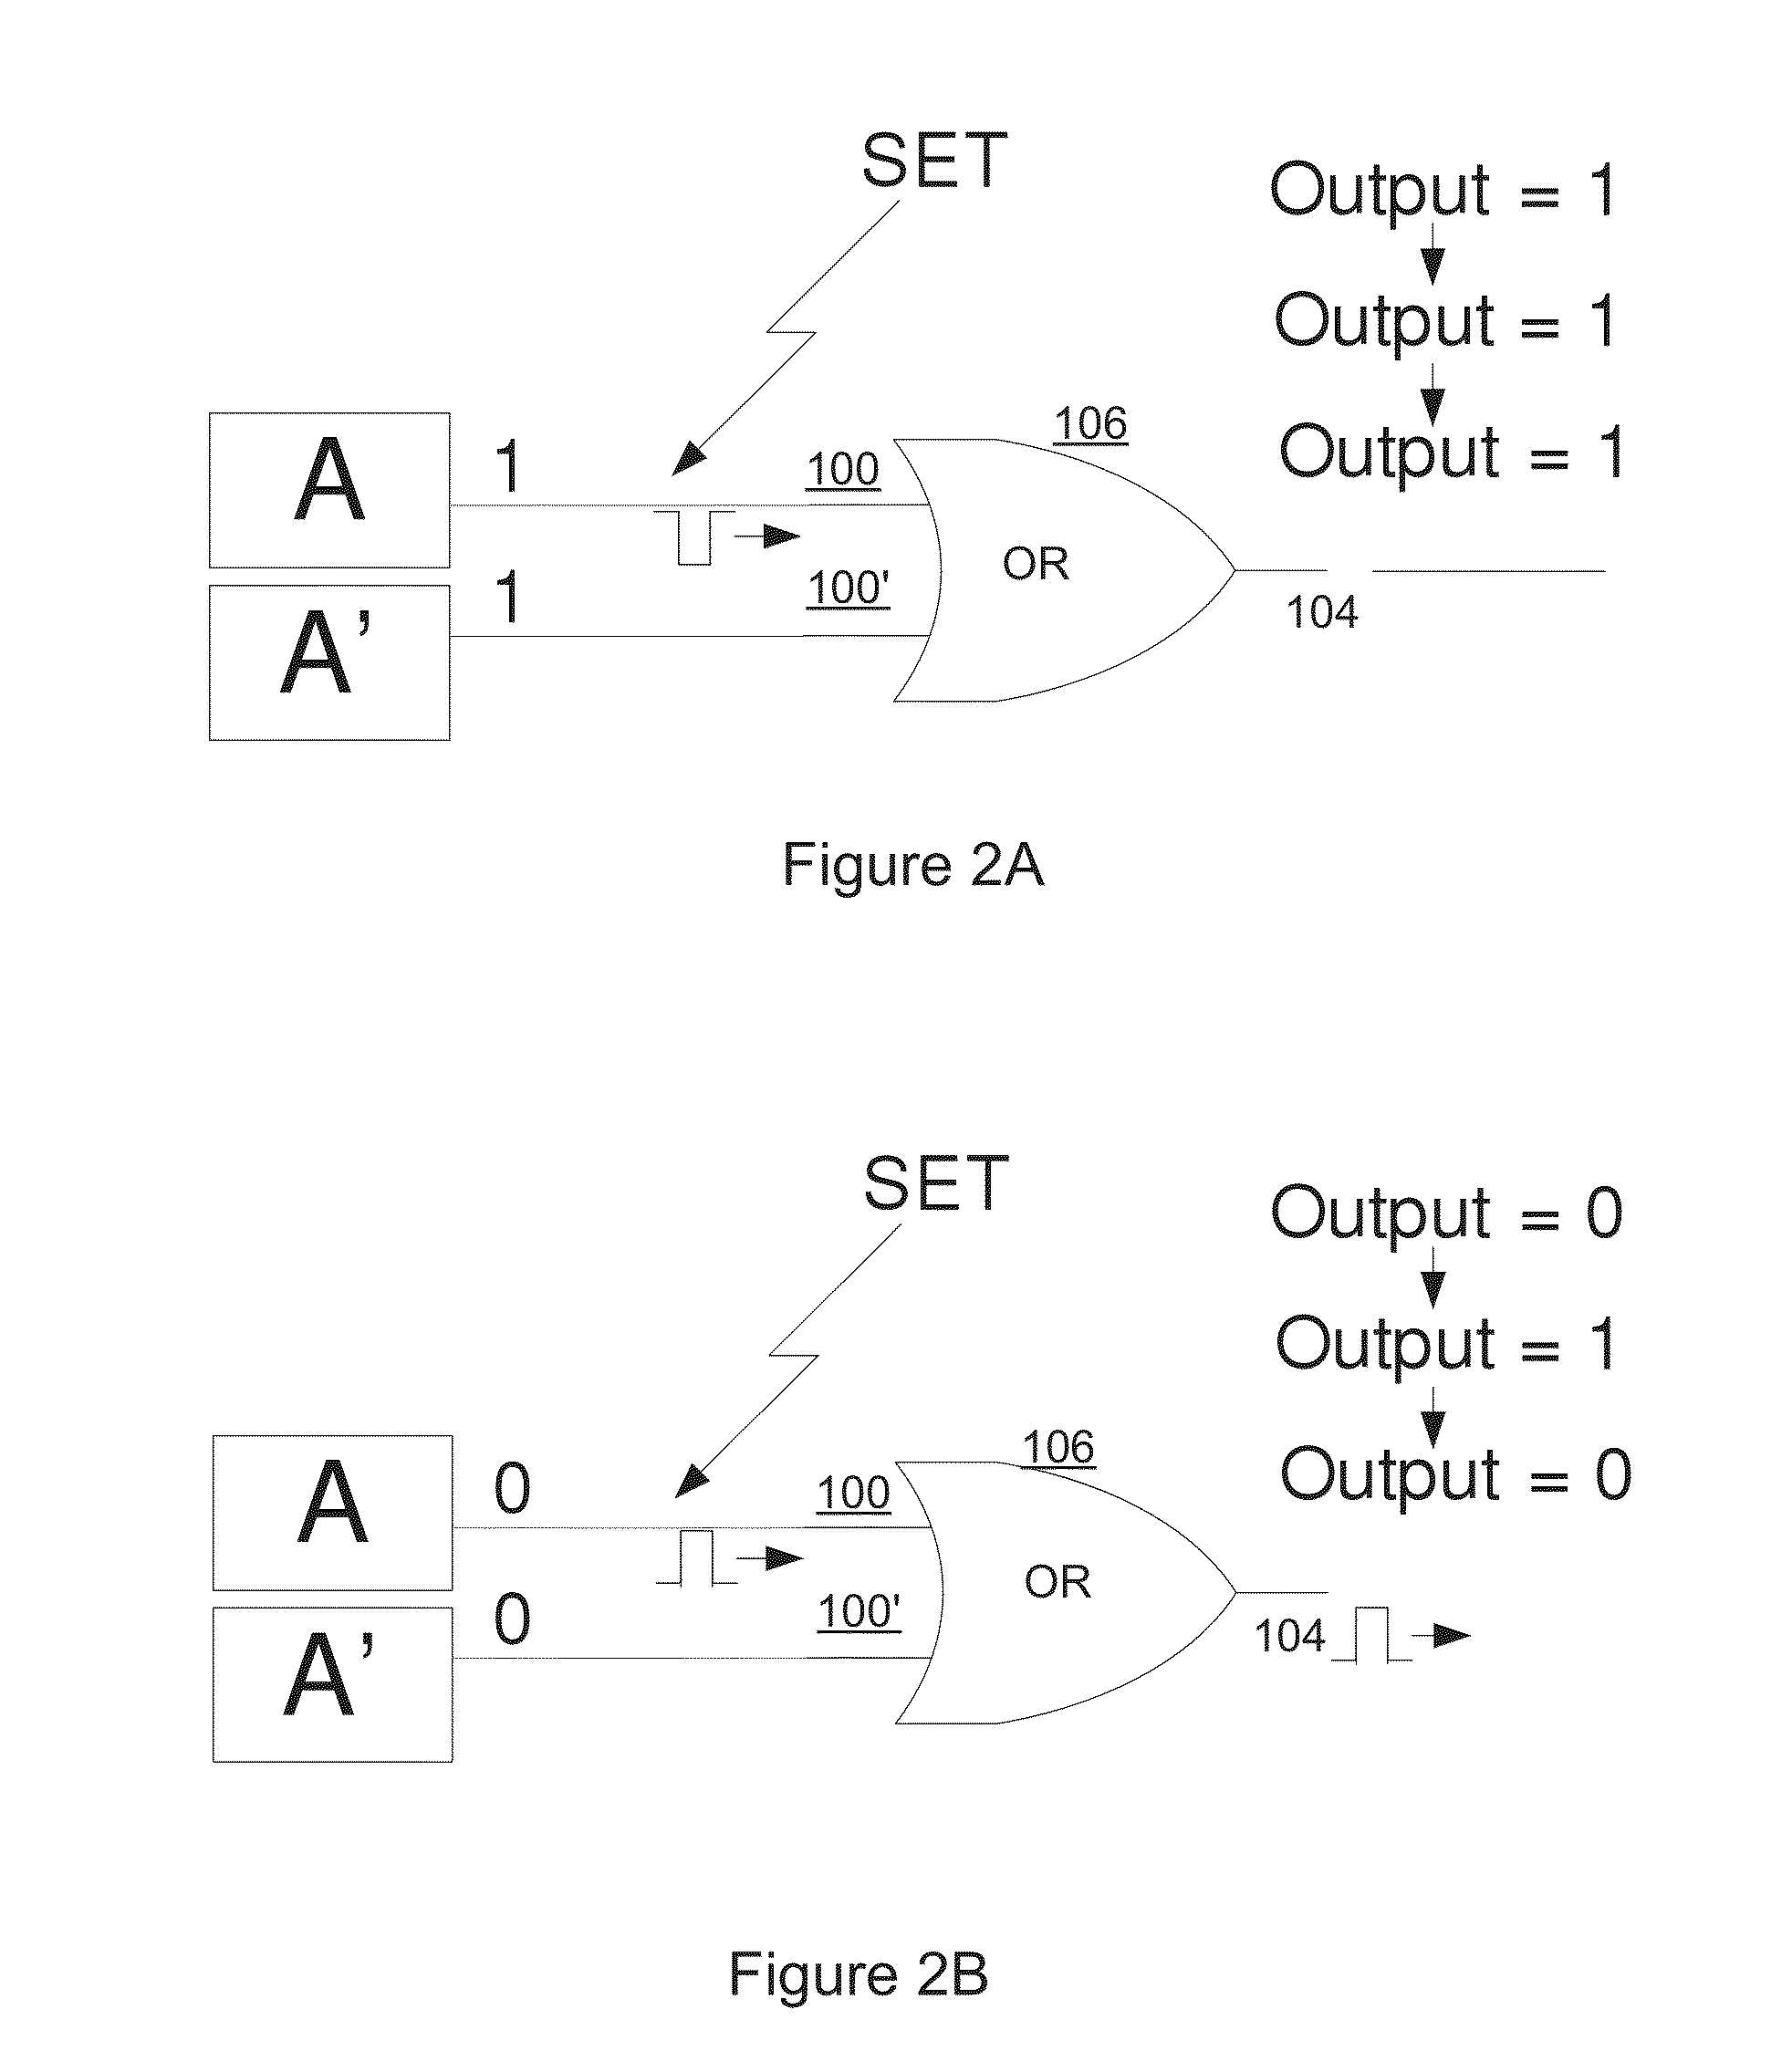 Method and circuit structure for suppressing single event transients or glitches in digital electronic circuits